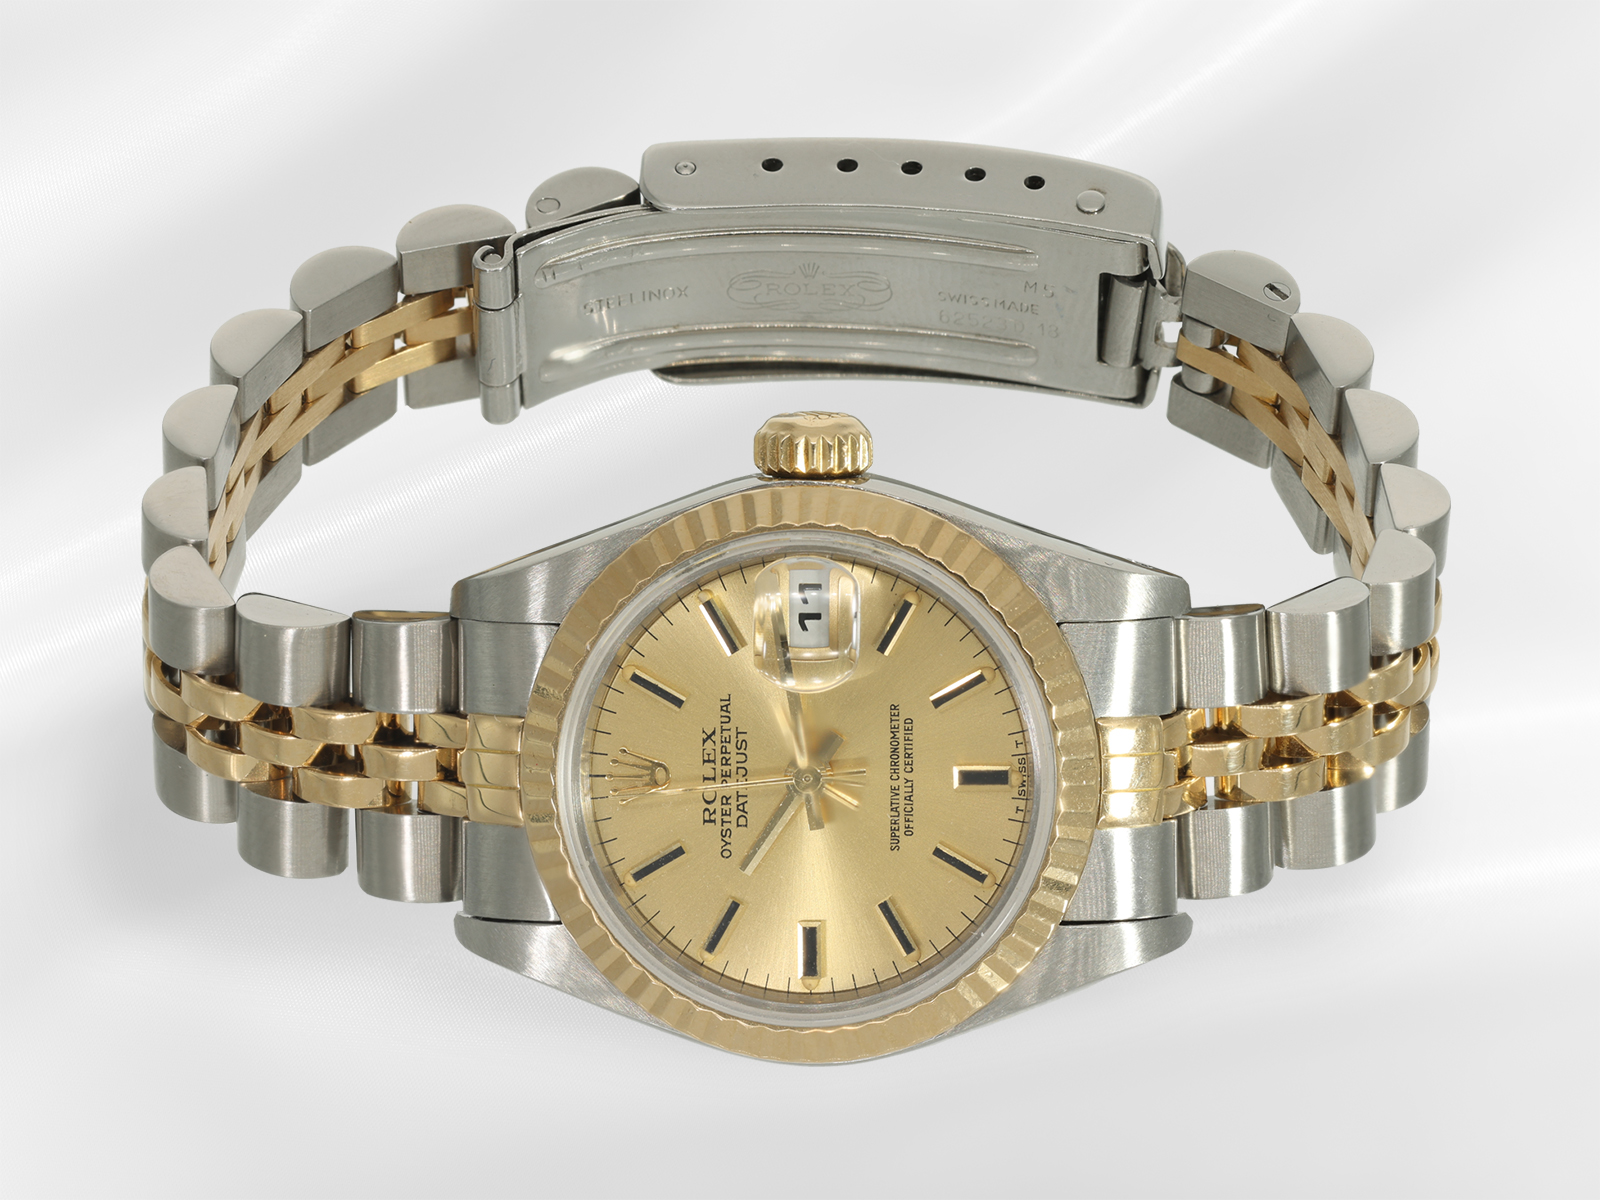 Wristwatch: Rolex Lady-Datejust Ref.69173 in steel/gold, year of manufacture 1987 - Image 3 of 4